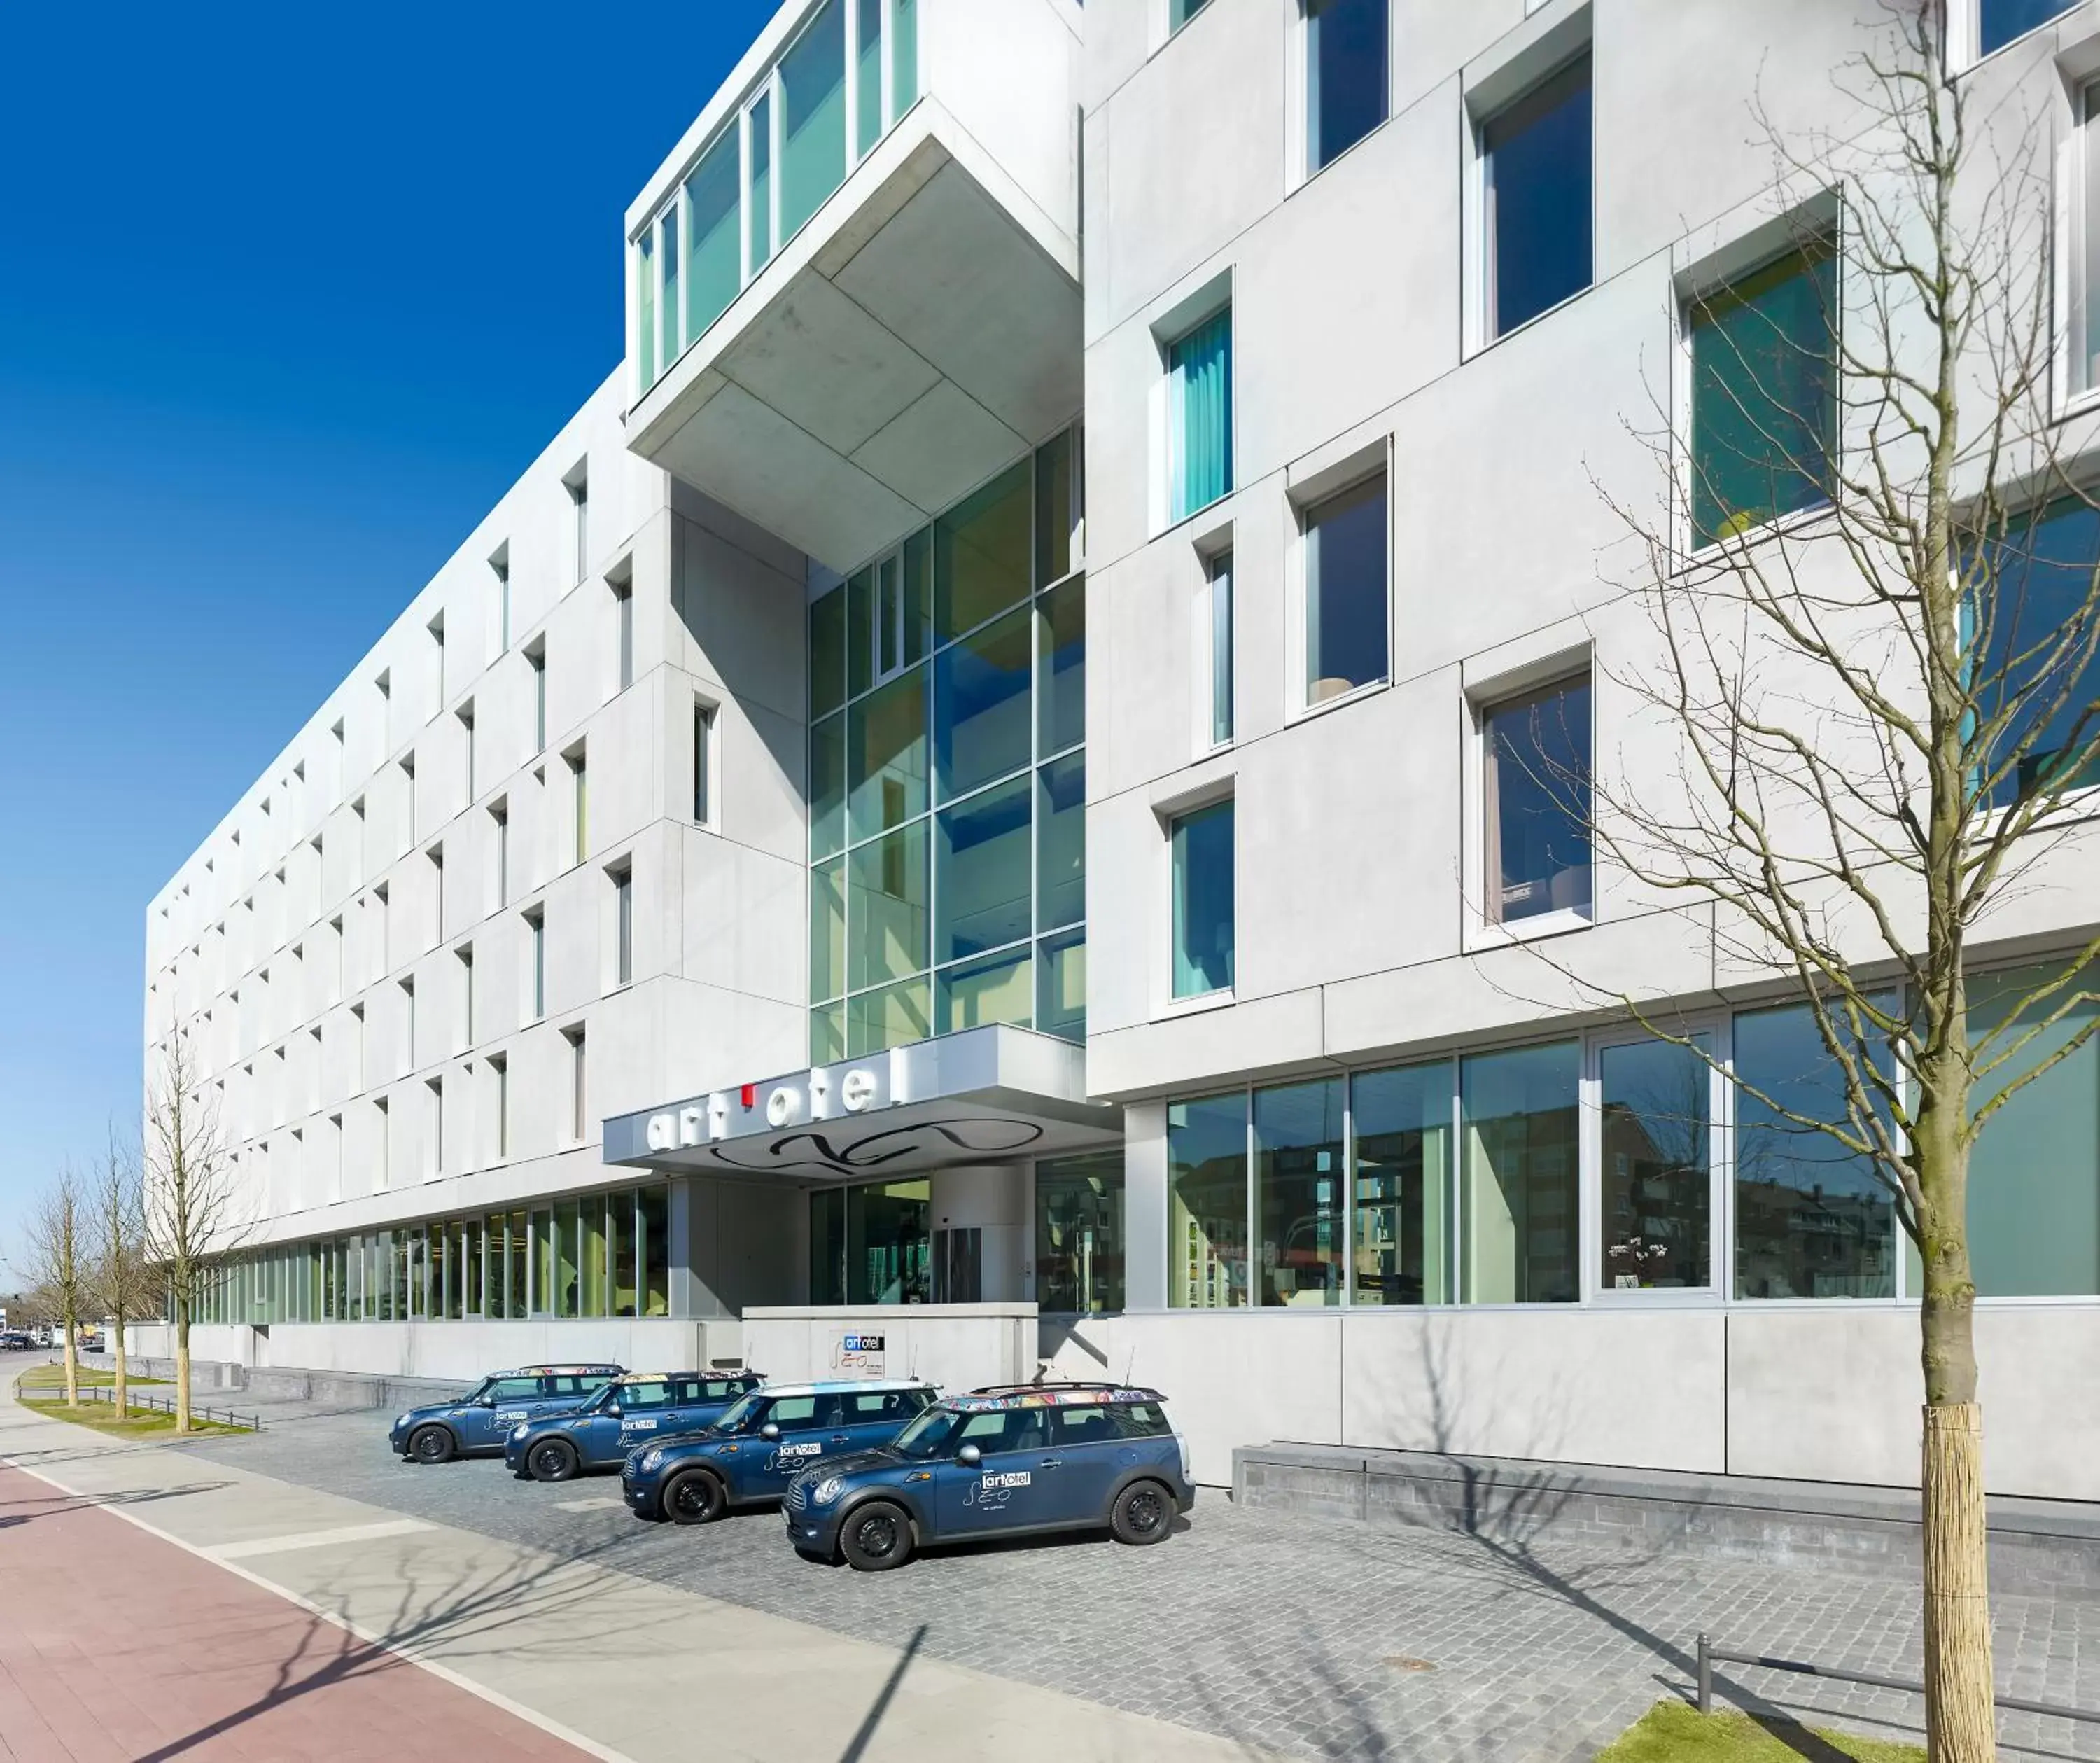 Property Building in art'otel cologne, Powered by Radisson Hotels